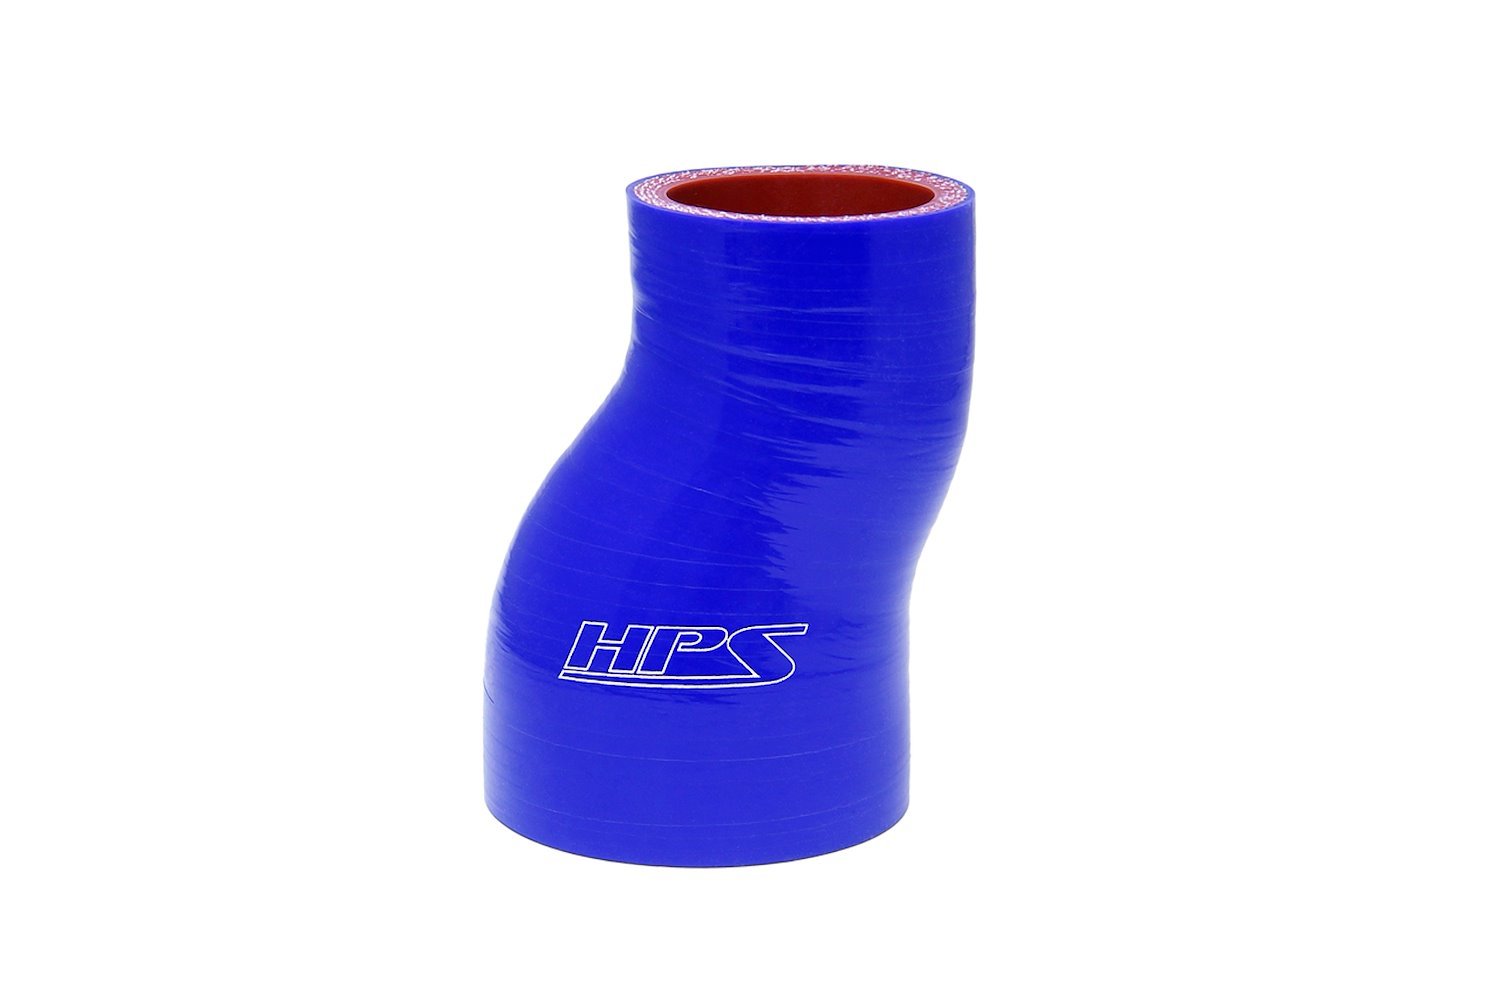 HTSOR-150-200-BLUE Silicone Offset Reducer Hose, High-Temp Reinforced, 1-1/2 in. - 2 in. ID, 3 in. Long, Blue